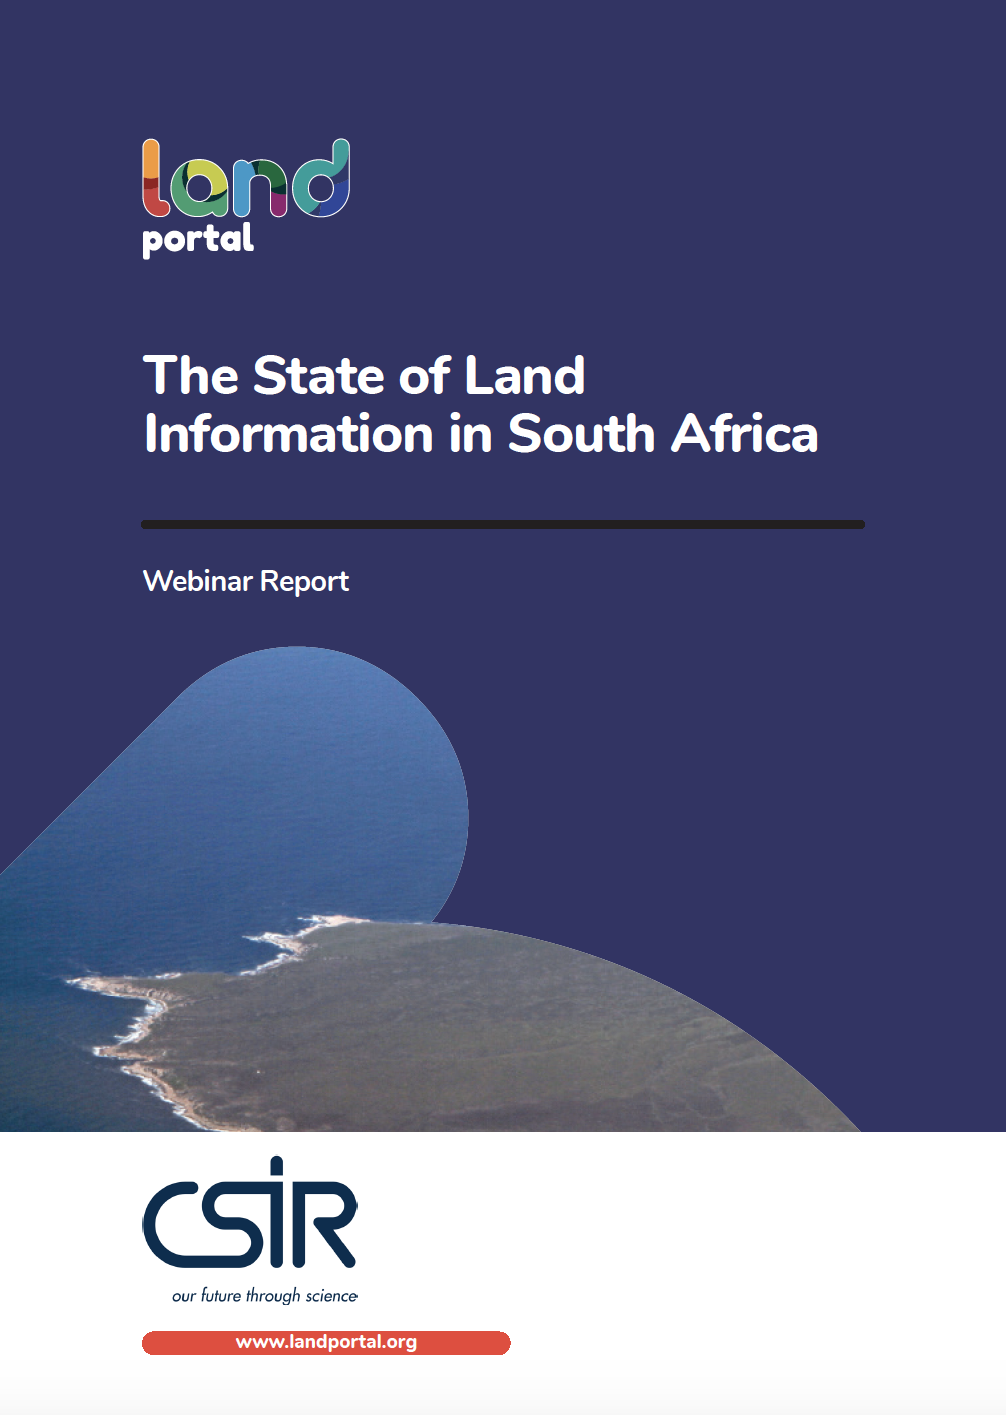 The State of Land Information in South Africa